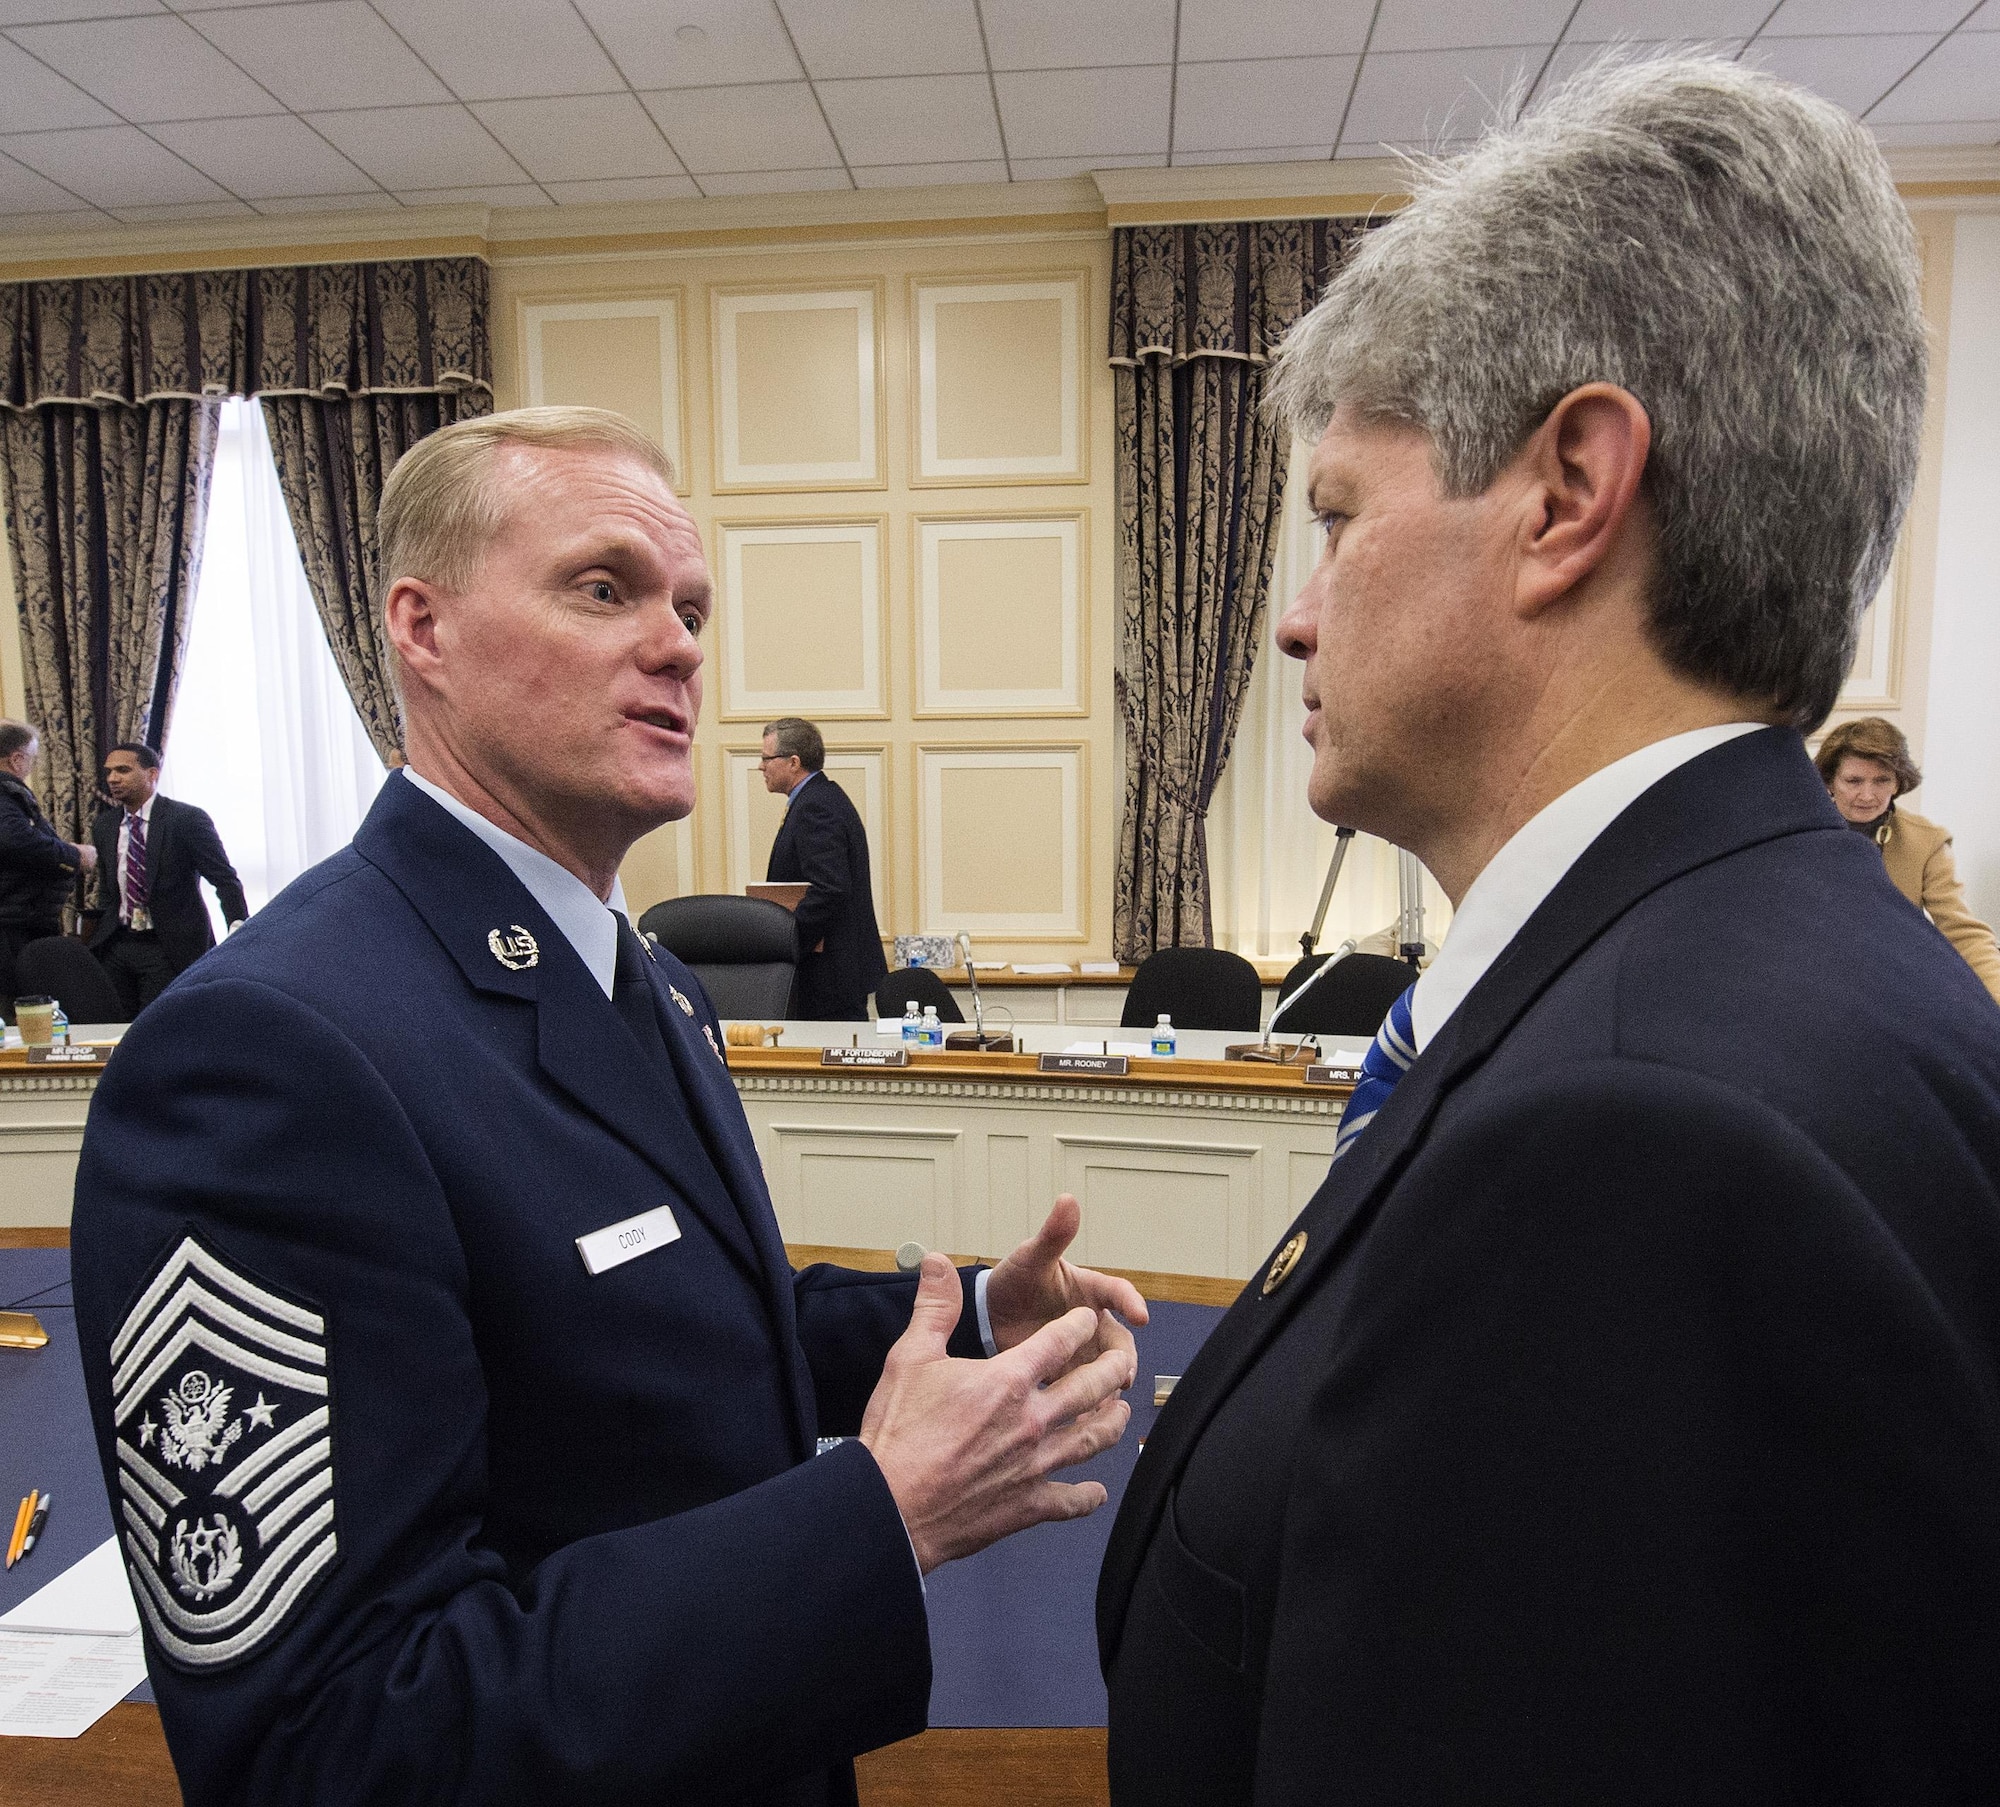 Chief Master Sgt. of the Air Force James A. Cody talks with Rep. Jeff Fortenberry (R-Neb.) following a hearing of the House Appropriations Committee’s Subcommittee on Military Construction and Veterans Affairs Feb. 26, 2016, in Washington, D.C. Fortenberry is vice chair of the subcommittee. The oversight hearing was being held to learn about quality of life in the military concerns from each of the service's senior most enlisted members. During his opening statement Cody stressed the cumulative impacts of sequestered and reduced budgets on the compensation and quality of life of Airmen and their families. Cody stressed that the Airmen who serve today do so freely, proudly and voluntarily because they believe in what America stands for and are ready to defend its cause. He added that our nation must honor that commitment by providing for them and their families. (U.S. Air Force photo/Jim Varhegyi)